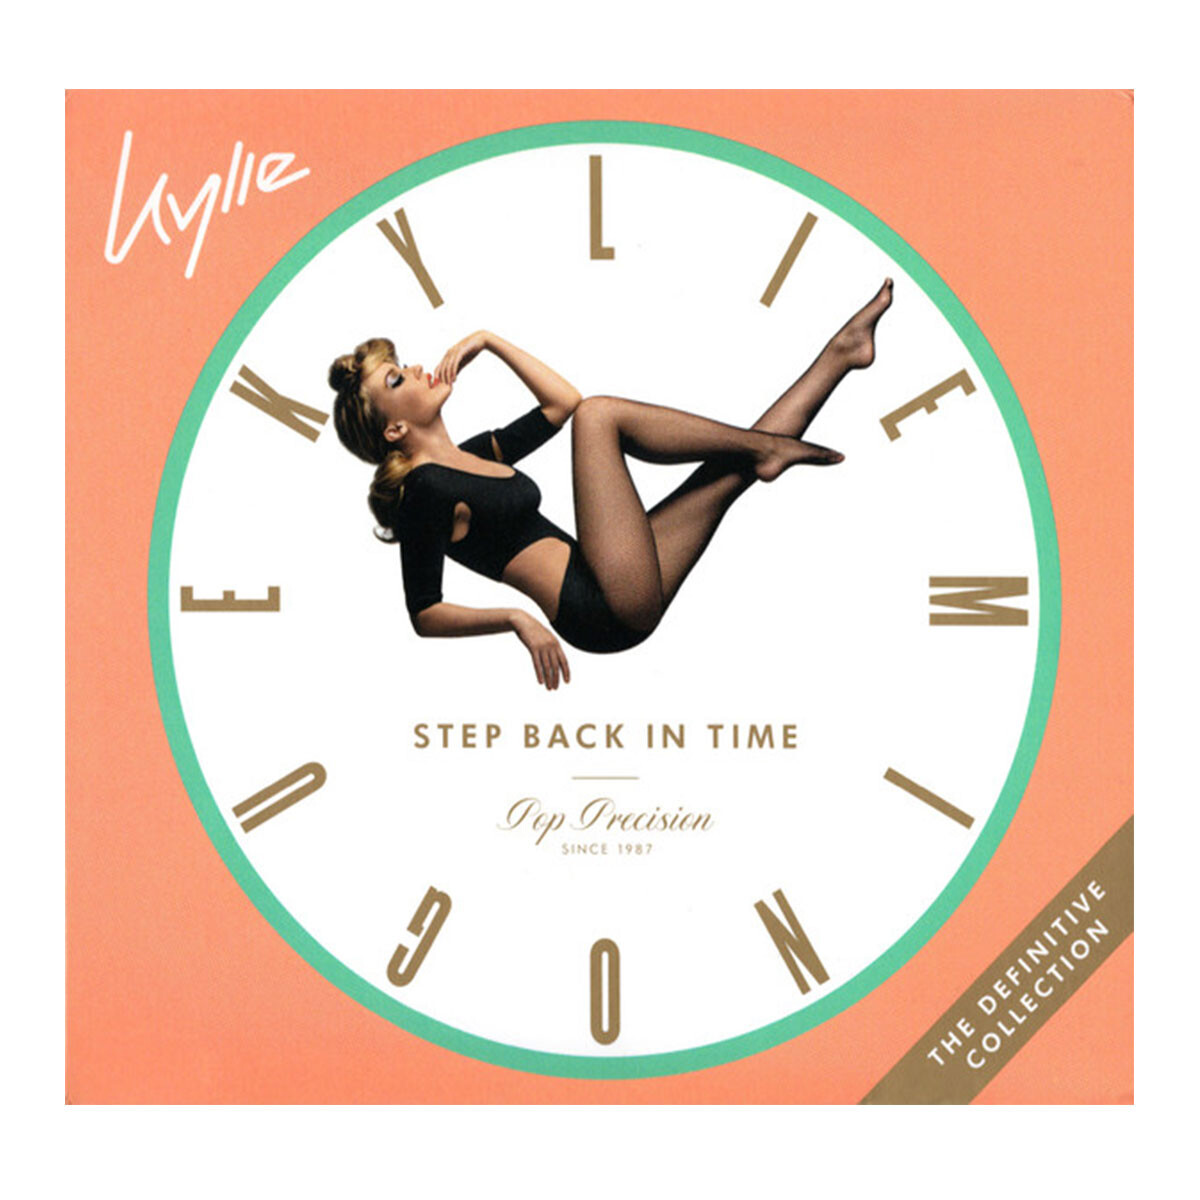 Kylie Minogue - Step Back In Time: The Definitive Collection Uk Vinilo 